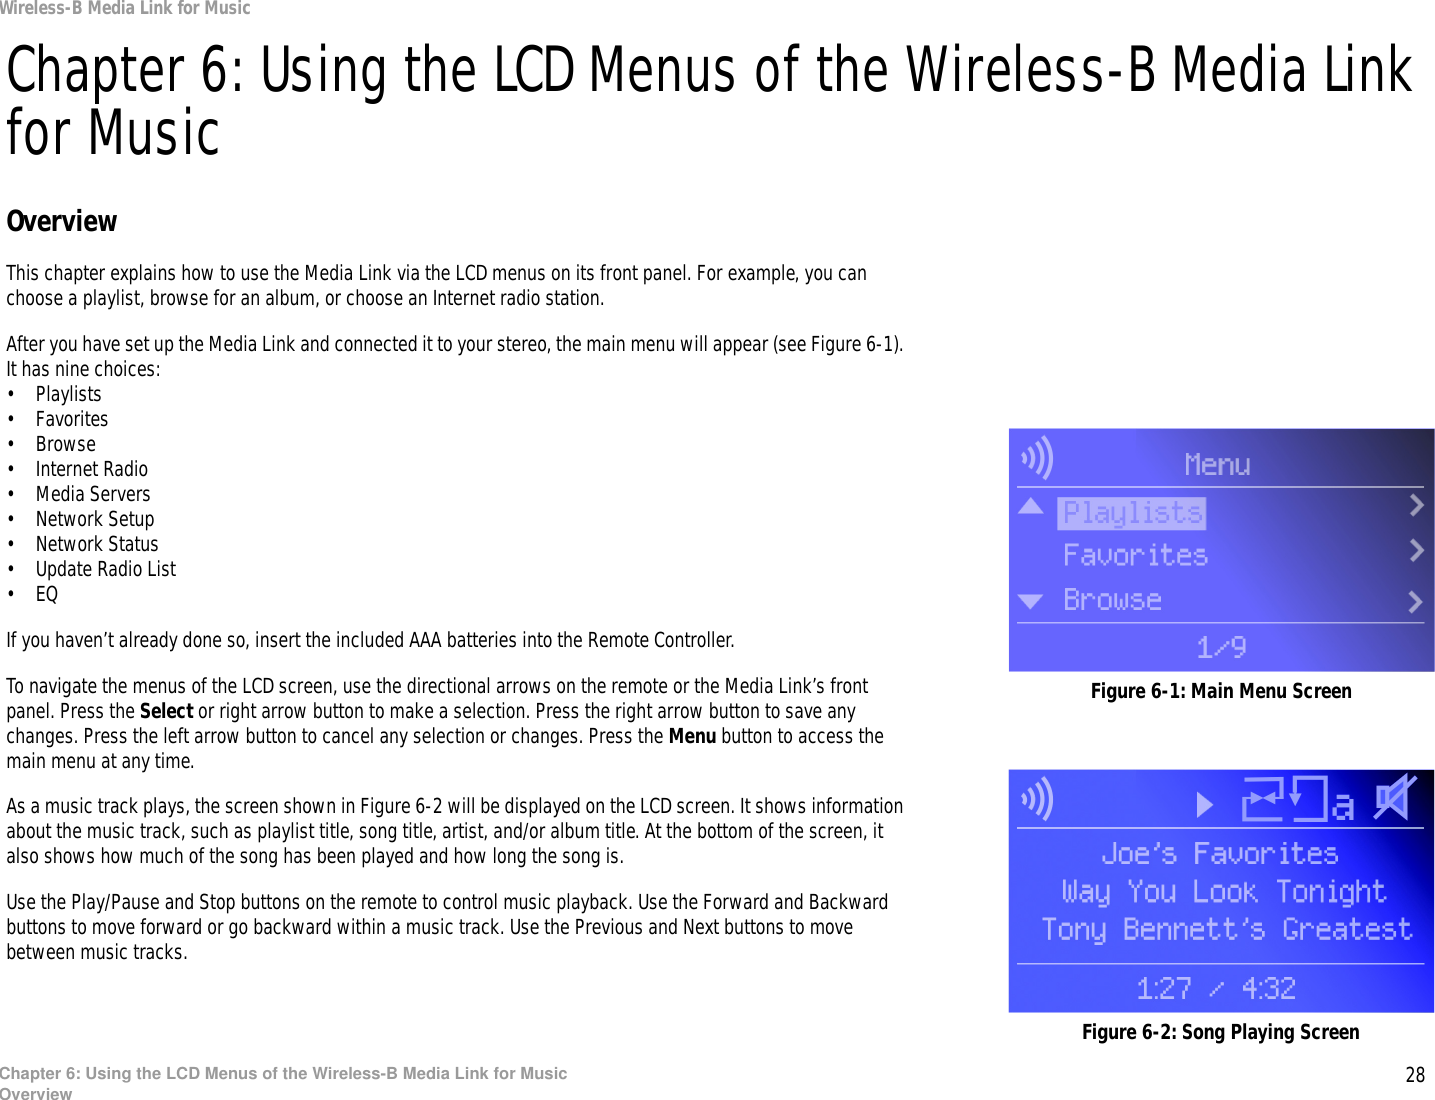 28Chapter 6: Using the LCD Menus of the Wireless-B Media Link for MusicOverviewWireless-B Media Link for MusicChapter 6: Using the LCD Menus of the Wireless-B Media Link for MusicOverviewThis chapter explains how to use the Media Link via the LCD menus on its front panel. For example, you can choose a playlist, browse for an album, or choose an Internet radio station.After you have set up the Media Link and connected it to your stereo, the main menu will appear (see Figure 6-1). It has nine choices:• Playlists• Favorites• Browse• Internet Radio• Media Servers•Network Setup• Network Status• Update Radio List•EQIf you haven’t already done so, insert the included AAA batteries into the Remote Controller.To navigate the menus of the LCD screen, use the directional arrows on the remote or the Media Link’s front panel. Press the Select or right arrow button to make a selection. Press the right arrow button to save any changes. Press the left arrow button to cancel any selection or changes. Press the Menu button to access the main menu at any time.As a music track plays, the screen shown in Figure 6-2 will be displayed on the LCD screen. It shows information about the music track, such as playlist title, song title, artist, and/or album title. At the bottom of the screen, it also shows how much of the song has been played and how long the song is.Use the Play/Pause and Stop buttons on the remote to control music playback. Use the Forward and Backward buttons to move forward or go backward within a music track. Use the Previous and Next buttons to move between music tracks.Figure 6-1: Main Menu ScreenFigure 6-2: Song Playing Screen